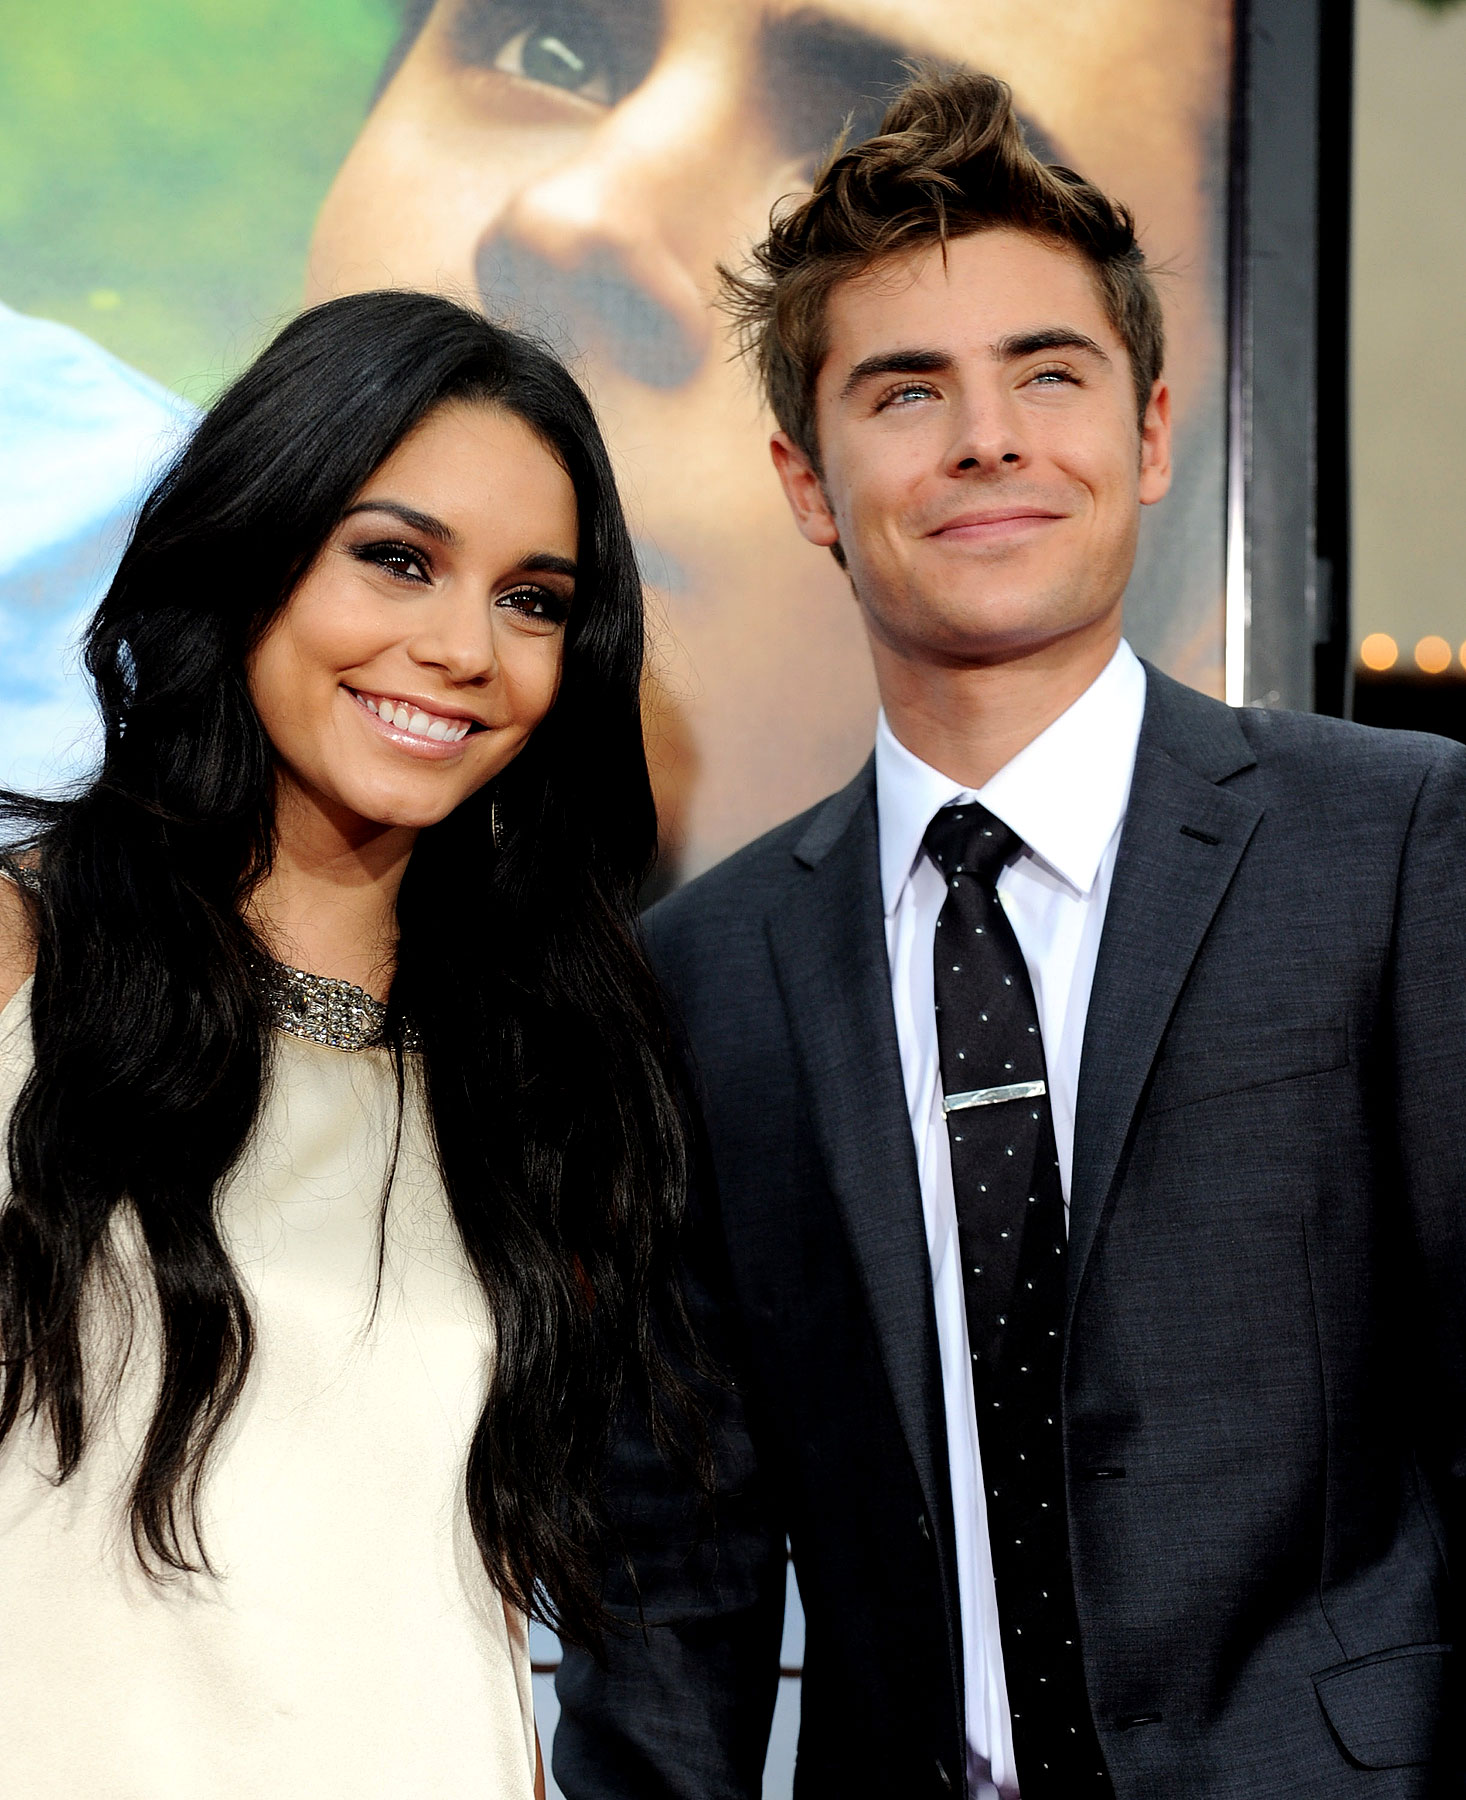 http://www.theplace.ru/archive/zac_efron/img/msg_127972664961_3.jpg